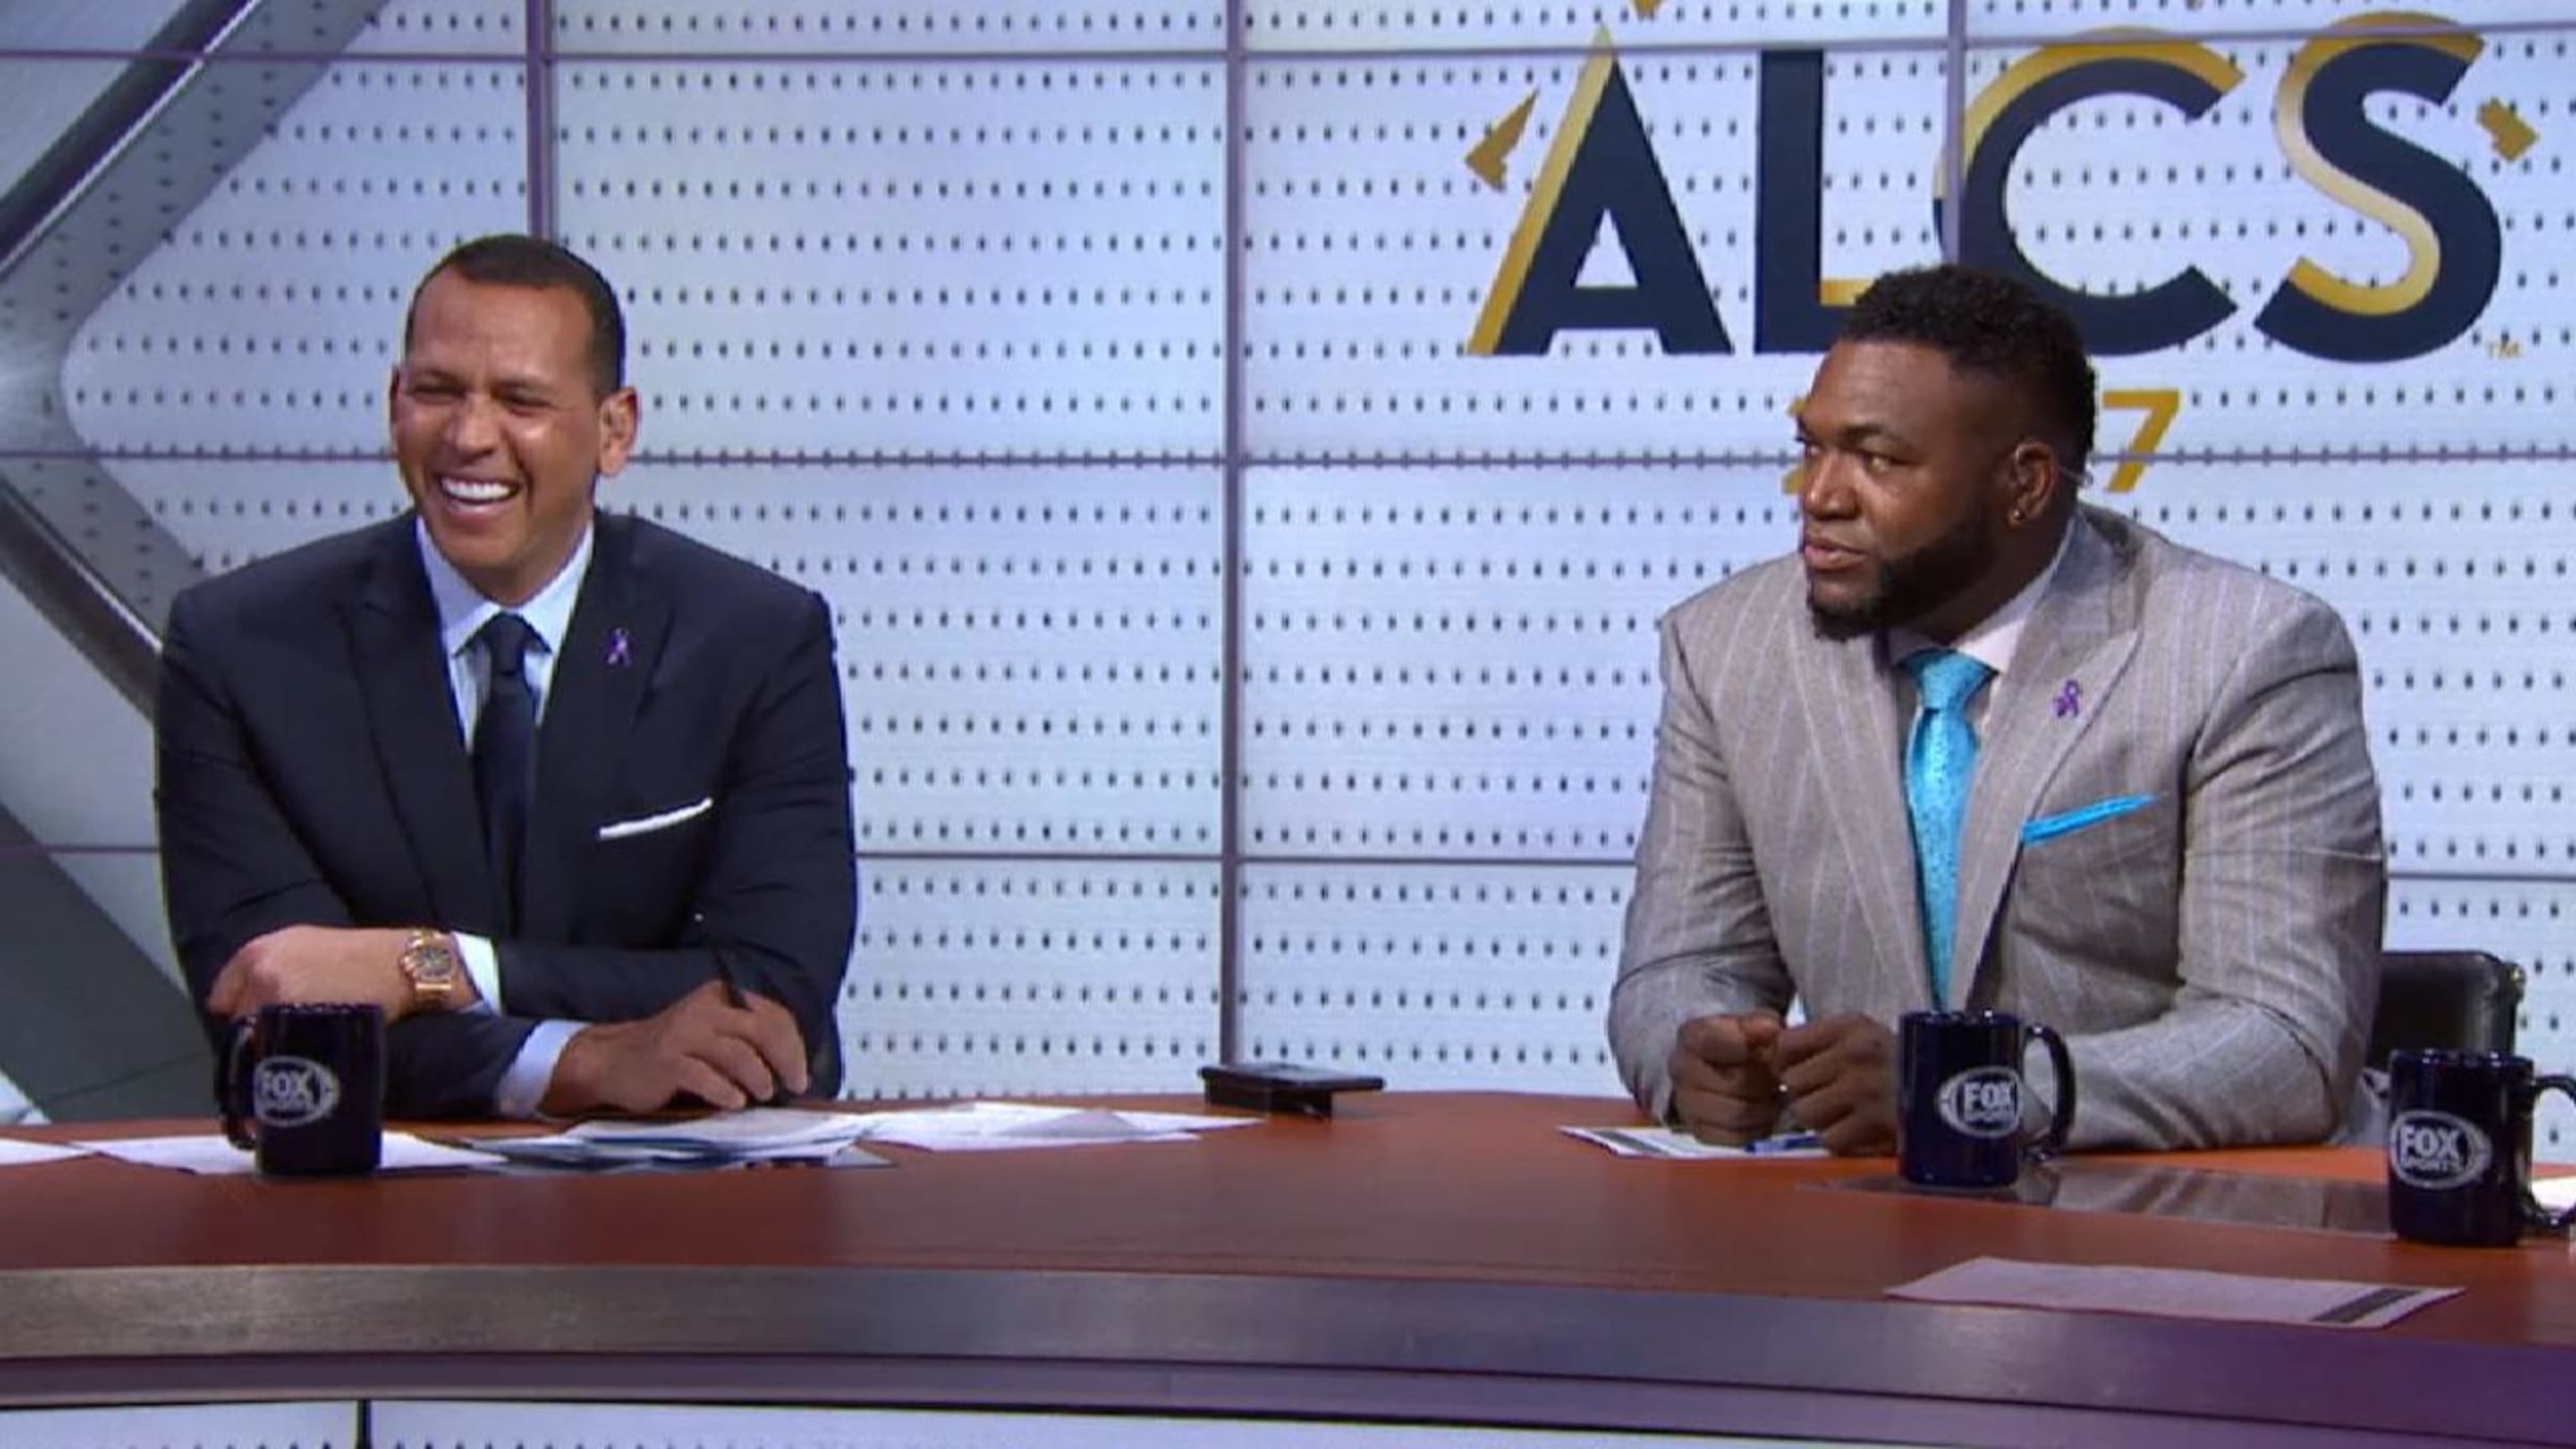 David Ortiz imitated John Sterling after the Yankees lost Game 7, much to  A-Rod's chagrin